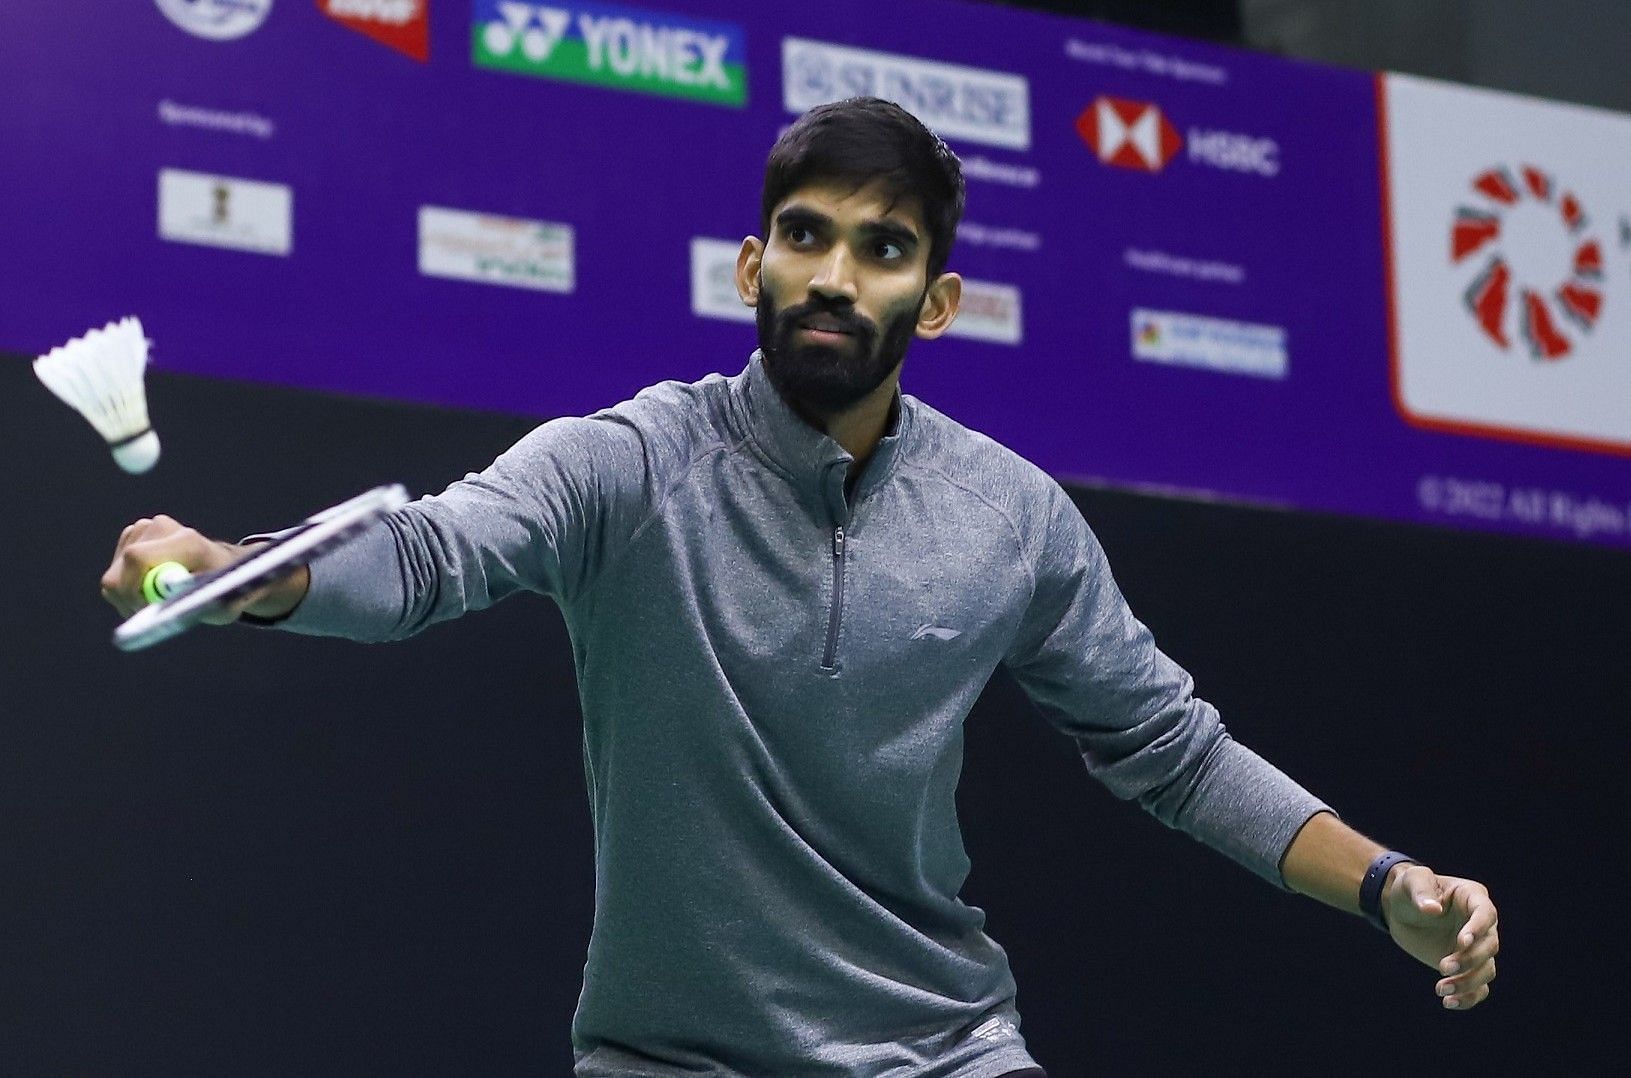 Kidambi Srikanth beat reigning Asian Games champion and world No. 8 Jonatan Christie 21-15, 23-21 to help India win 3-0 in the Thomas Cup final in Bangkok on Sunday. (Pic credit: BAI)